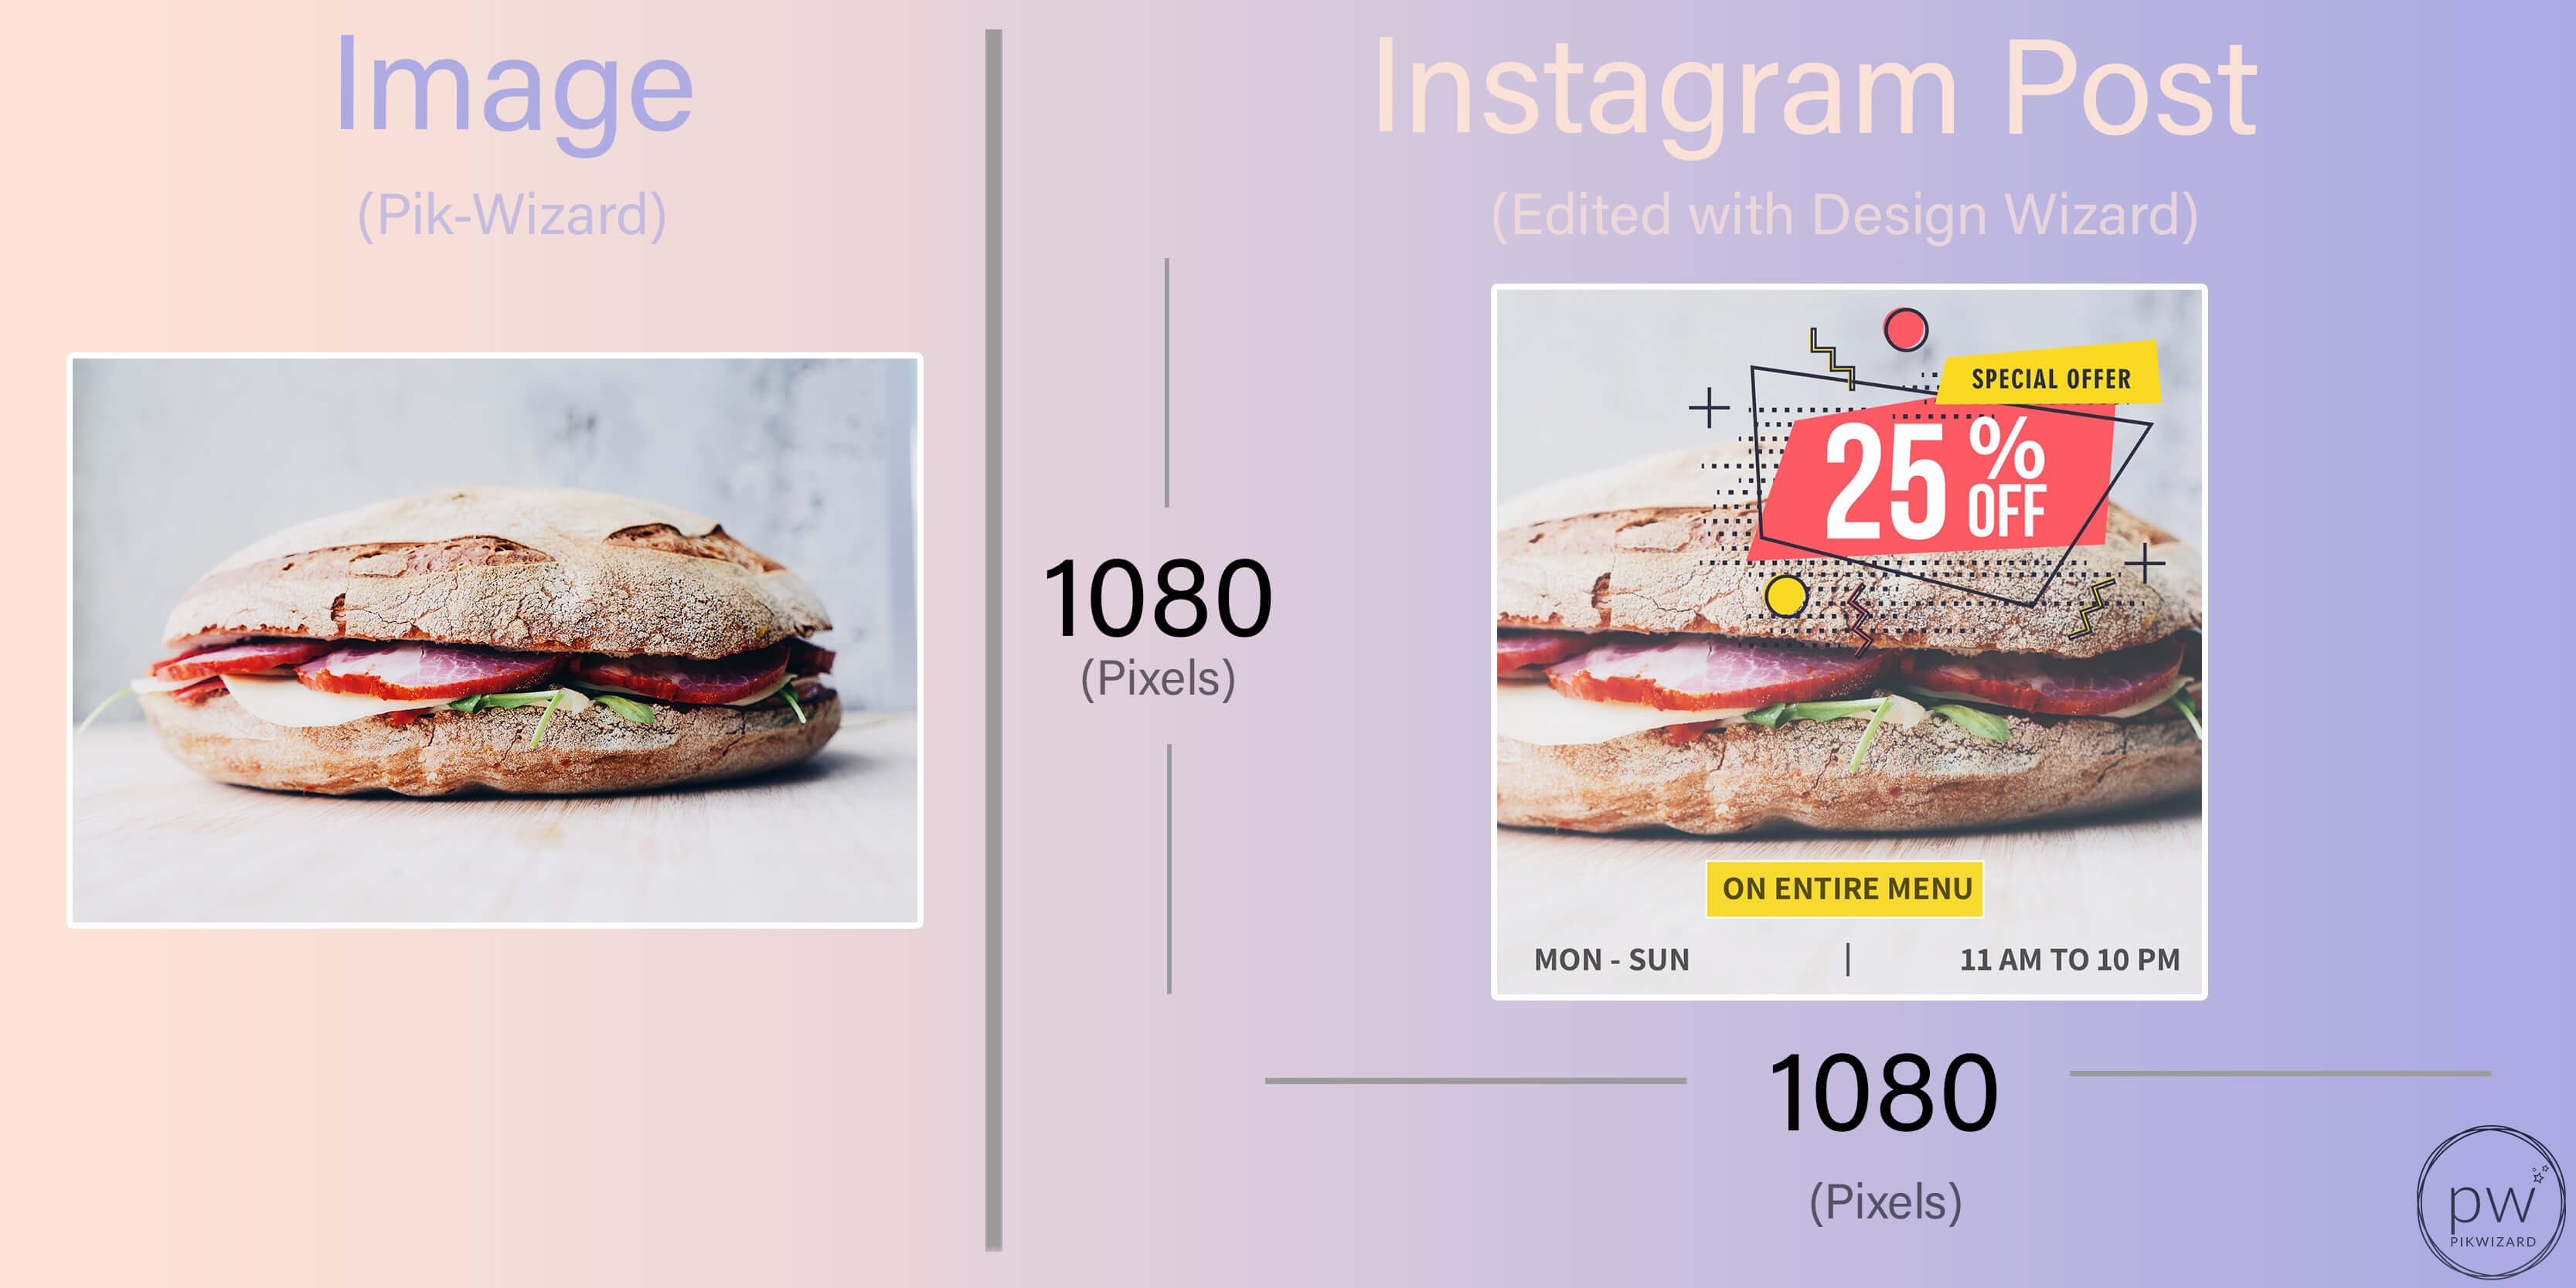 Side by side stock image and edited instagram post of a sandwich special offer - A complete beginner's guide on how to post on Instagram from a PC or Mac - Image